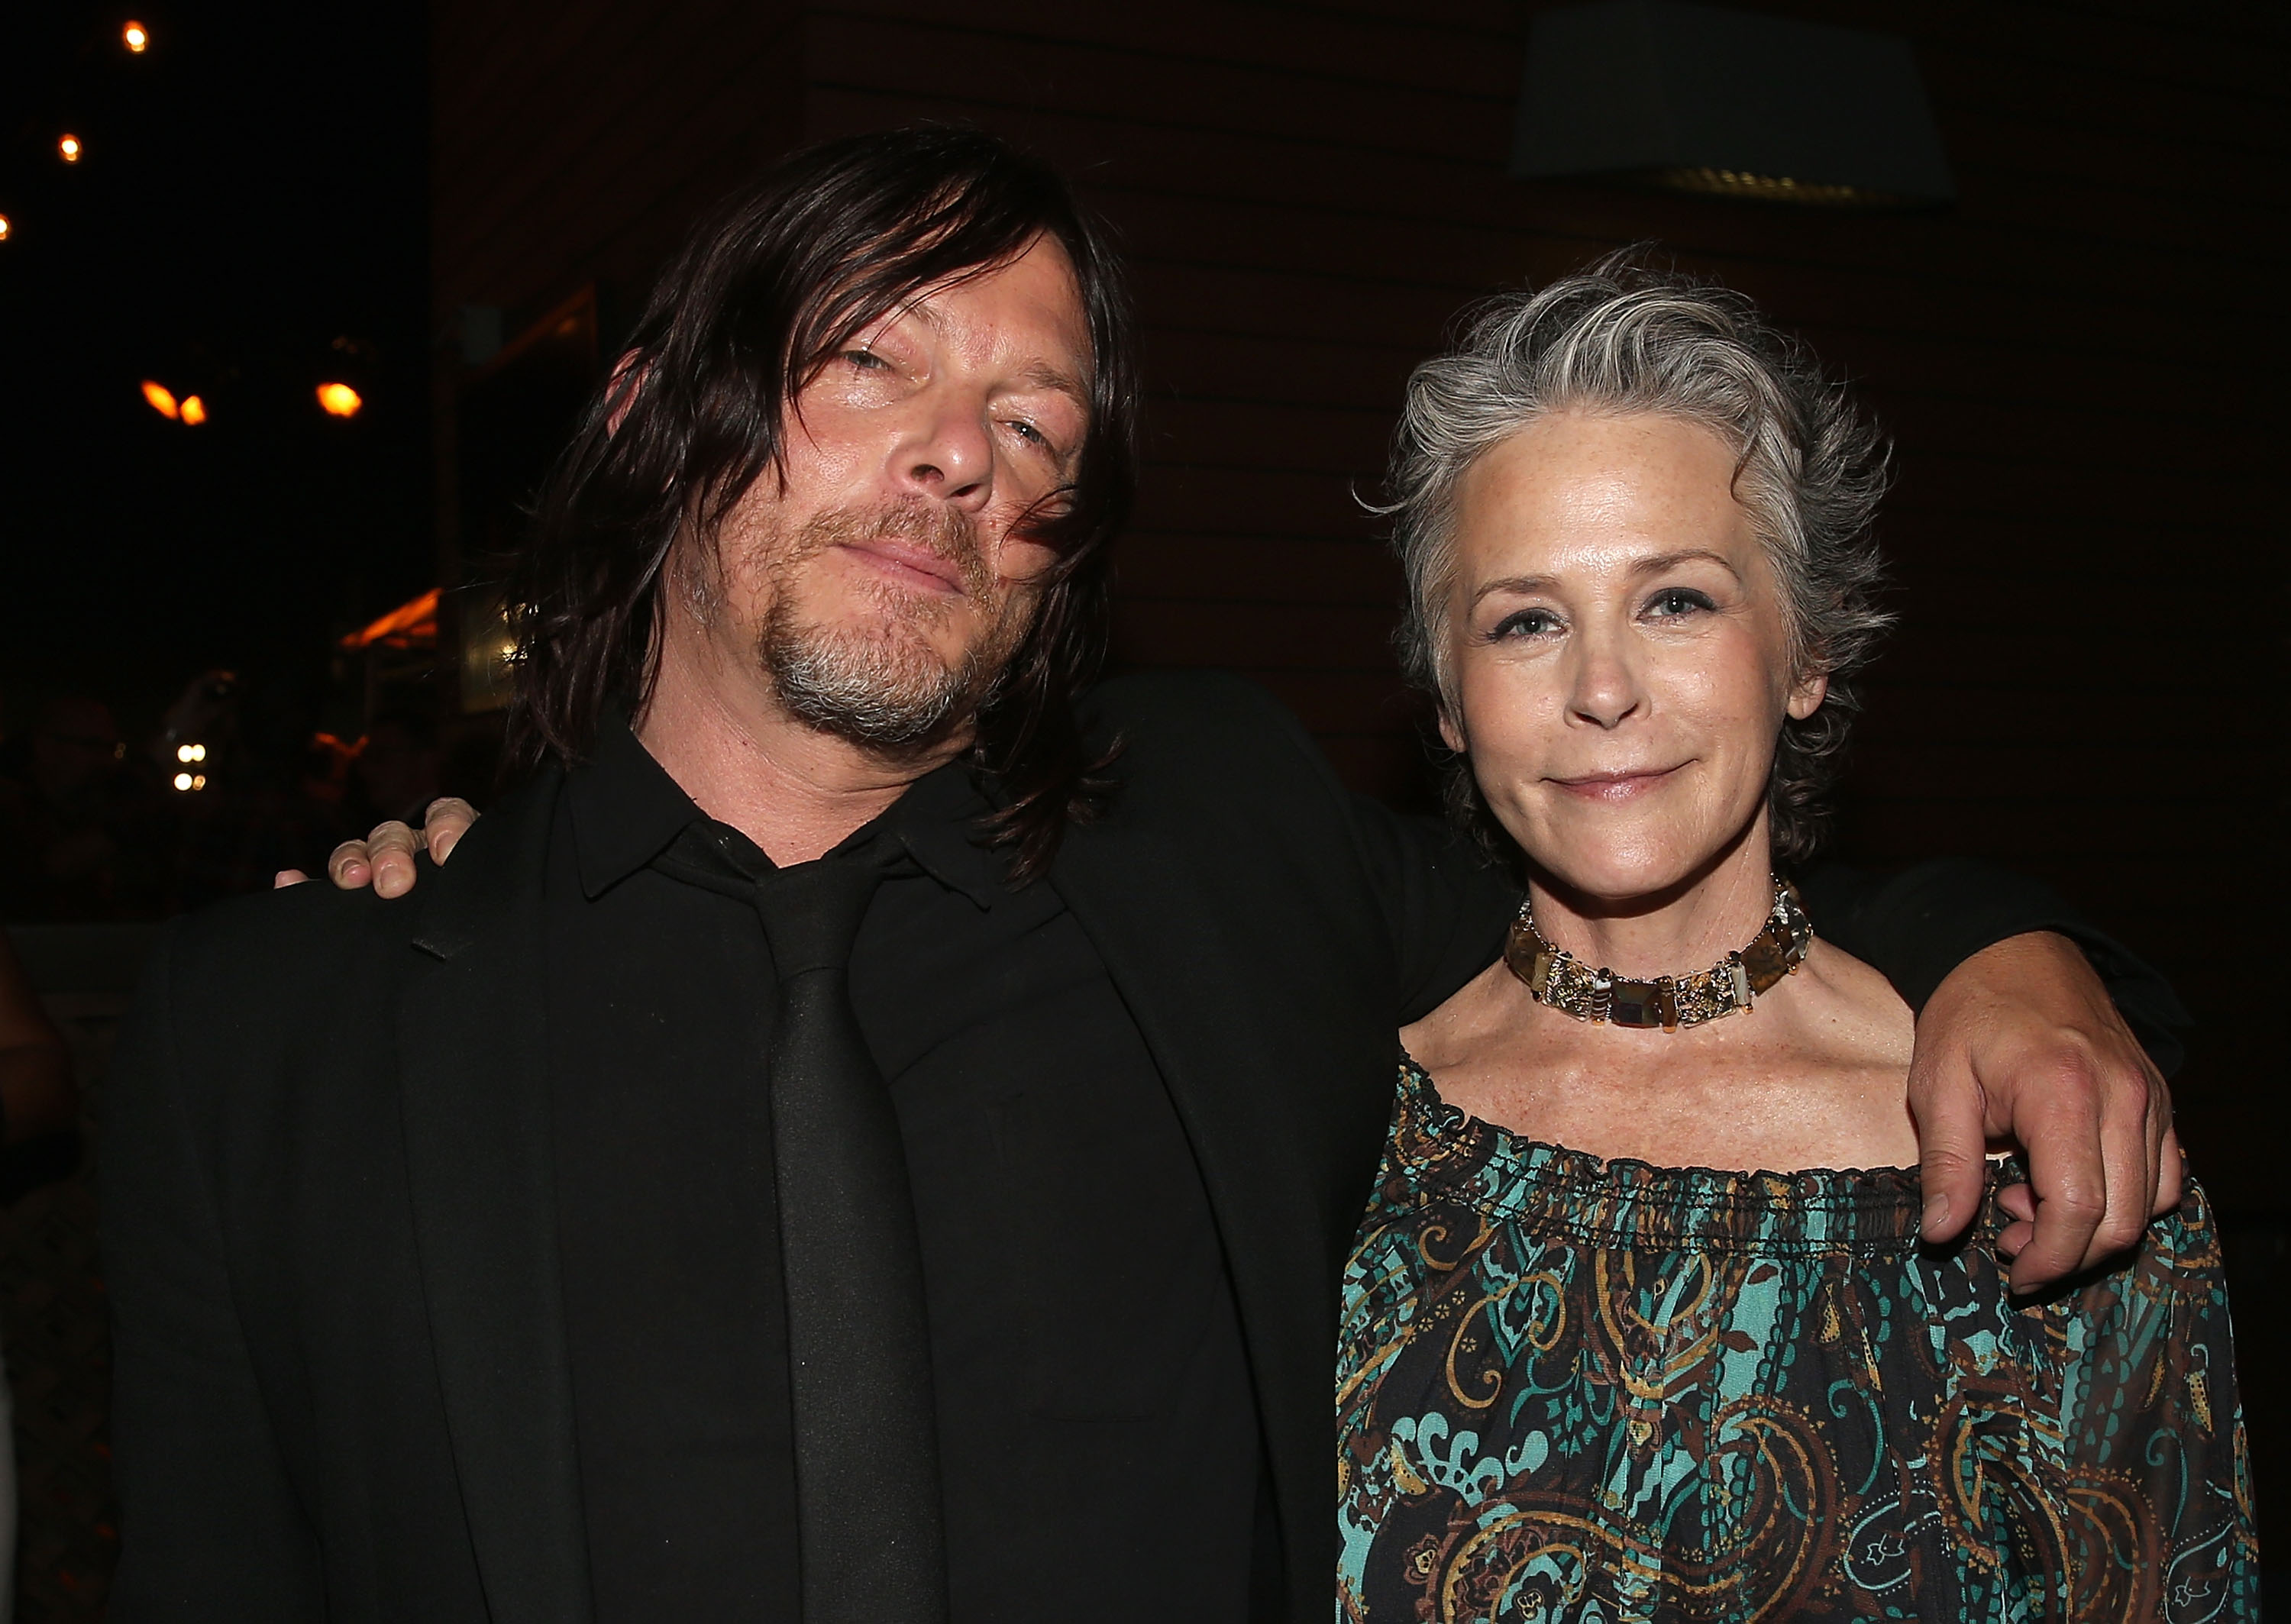  Norman Reedus and Melissa McBride of 'The Walking Dead'